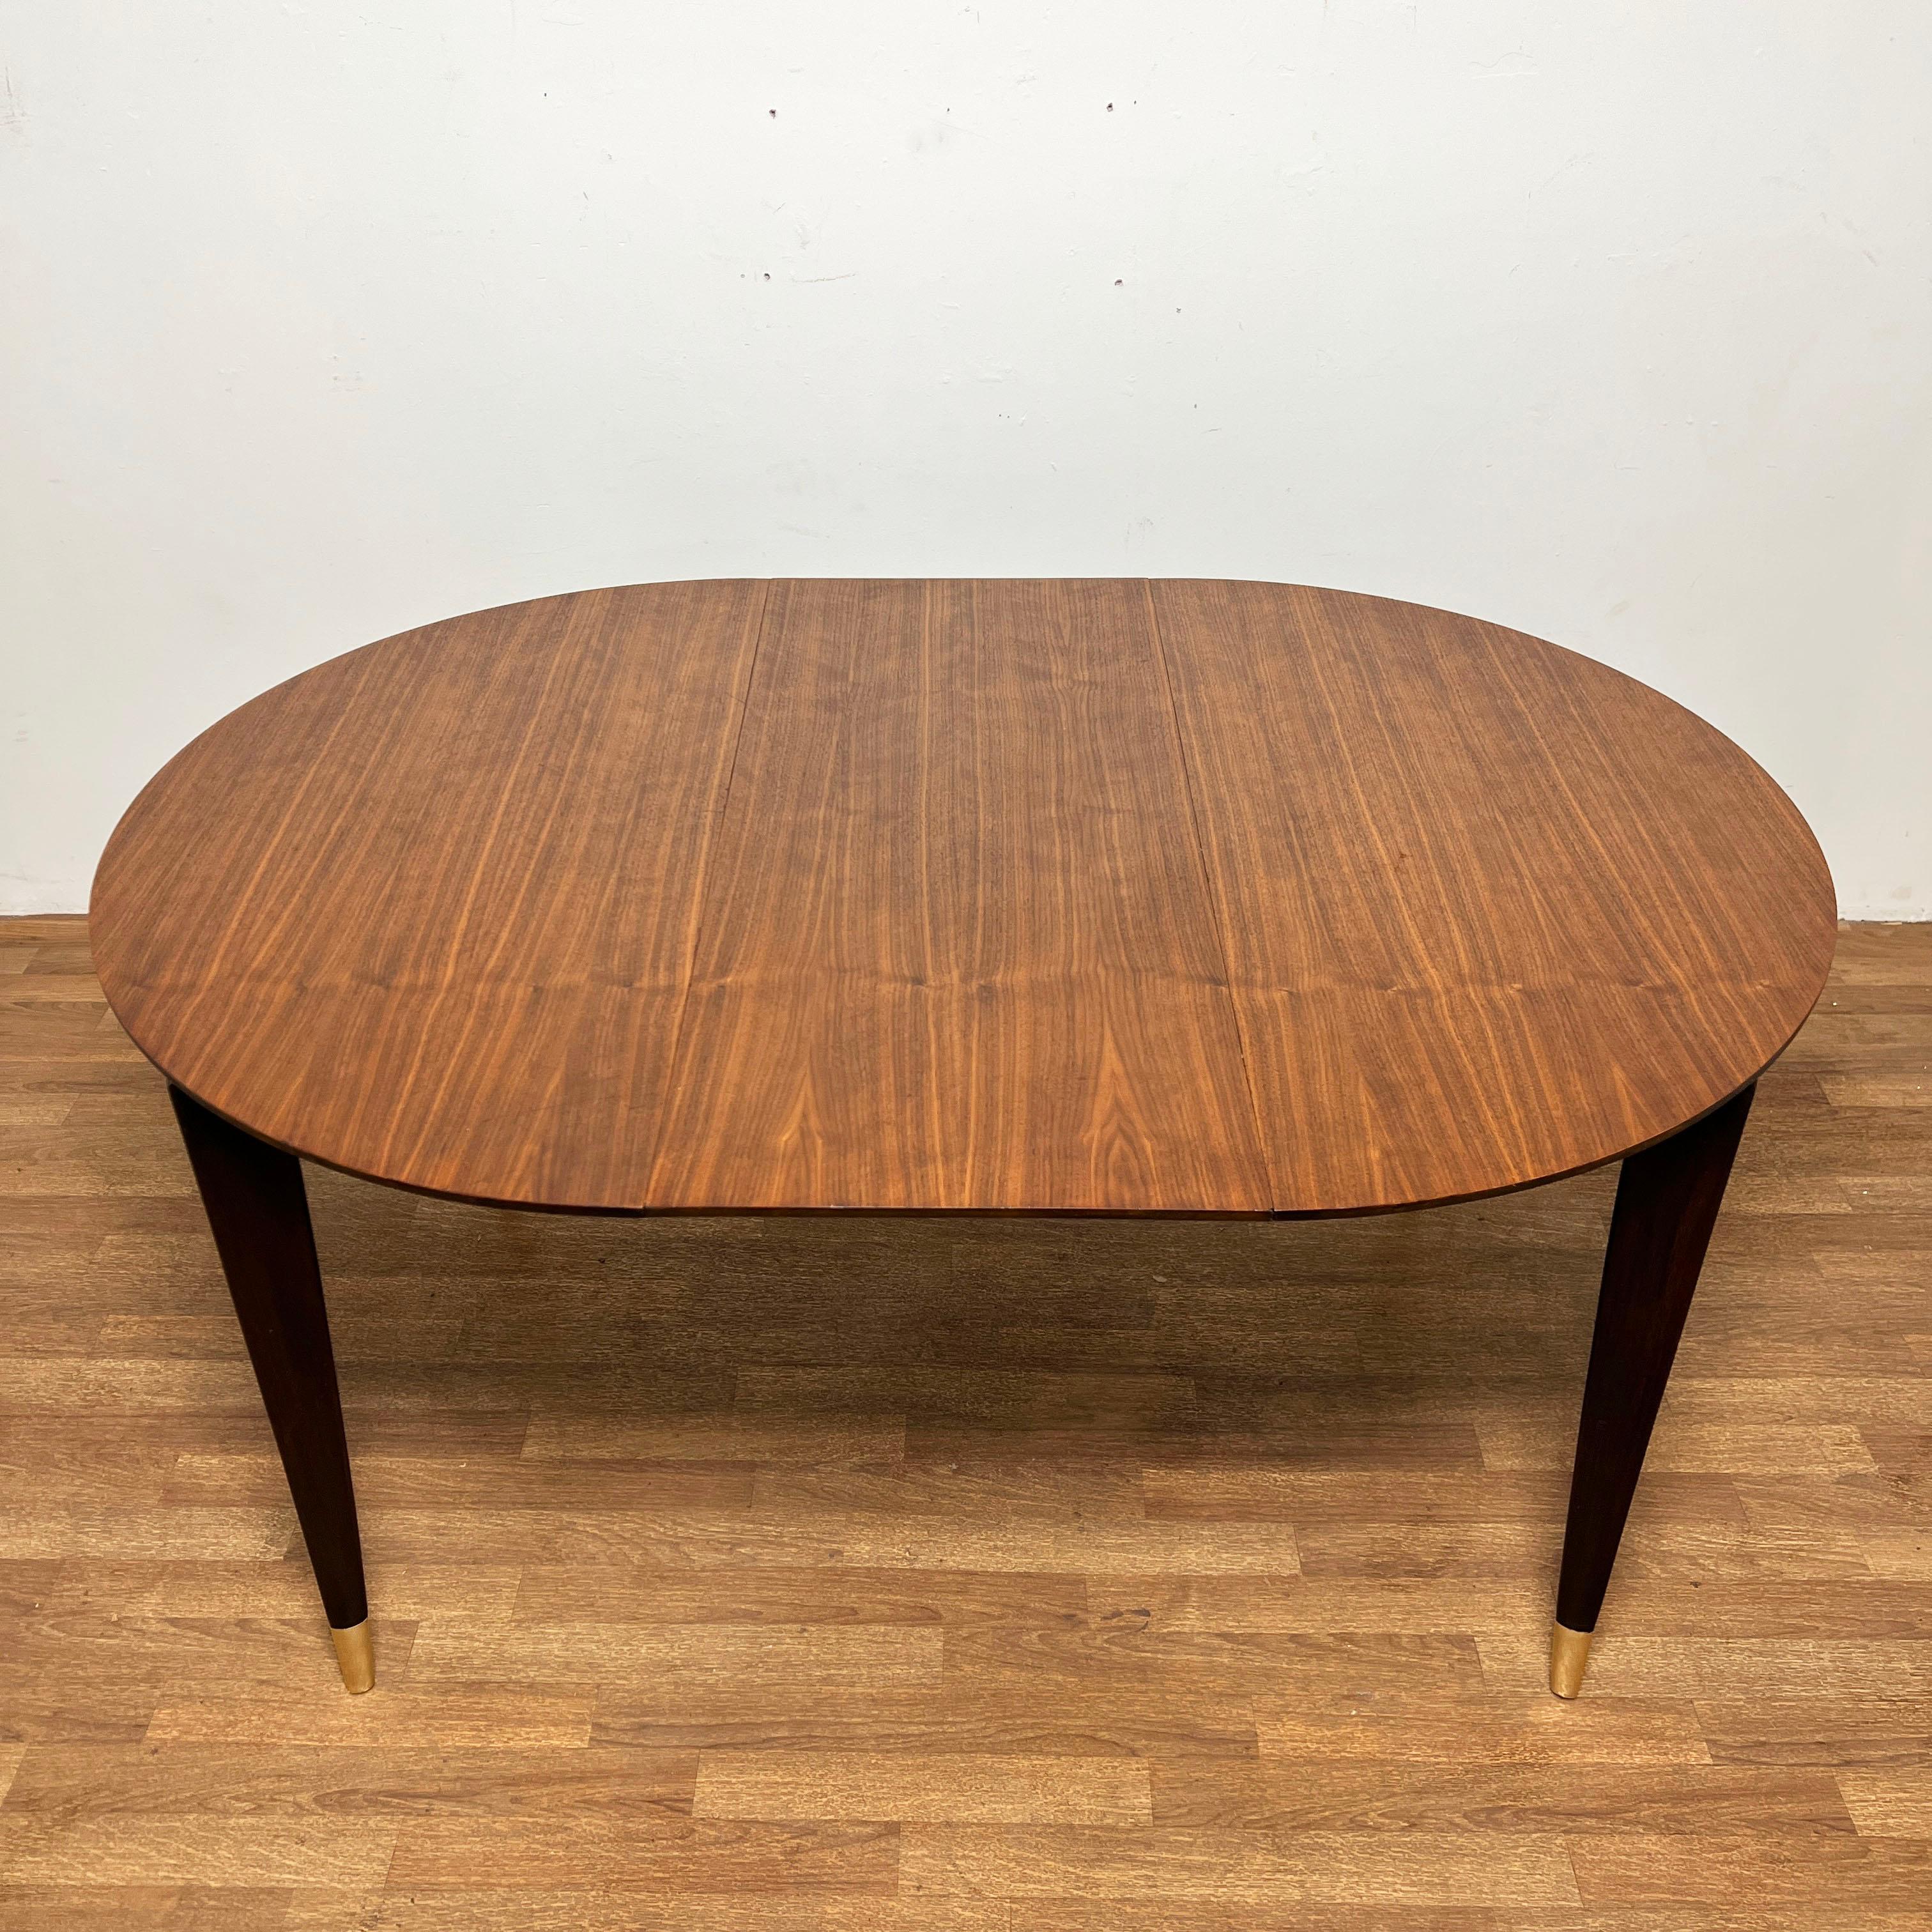 American Gio Ponti for Singer Dining Table in Walnut With Brass Sabots Circa 1950s For Sale